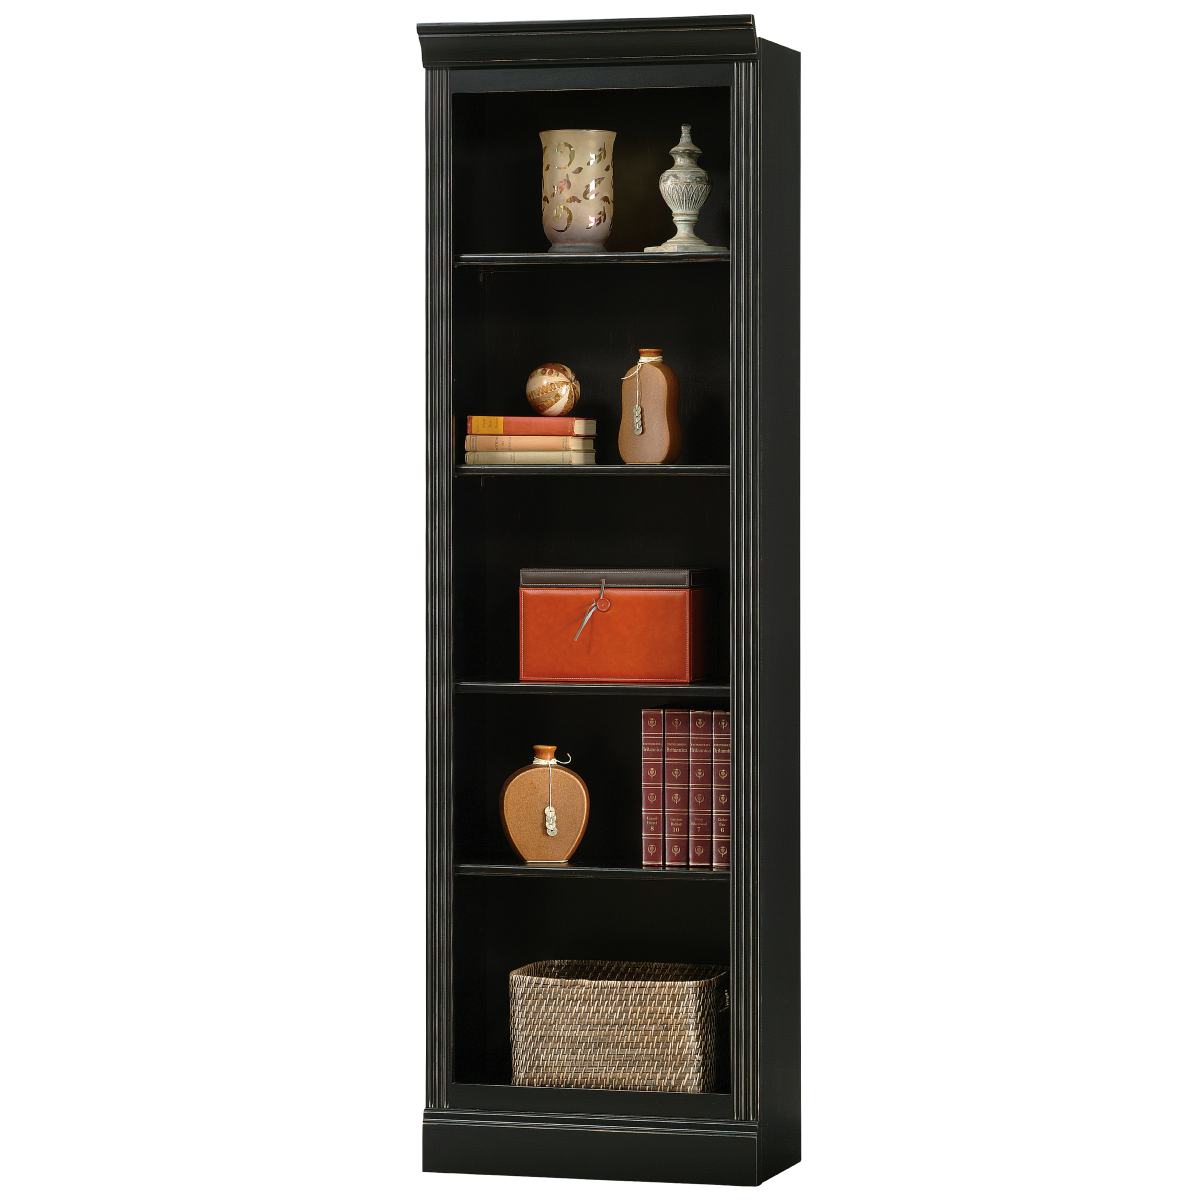 Howard Miller Bunching Bookcase 920017 - Home Bars USA